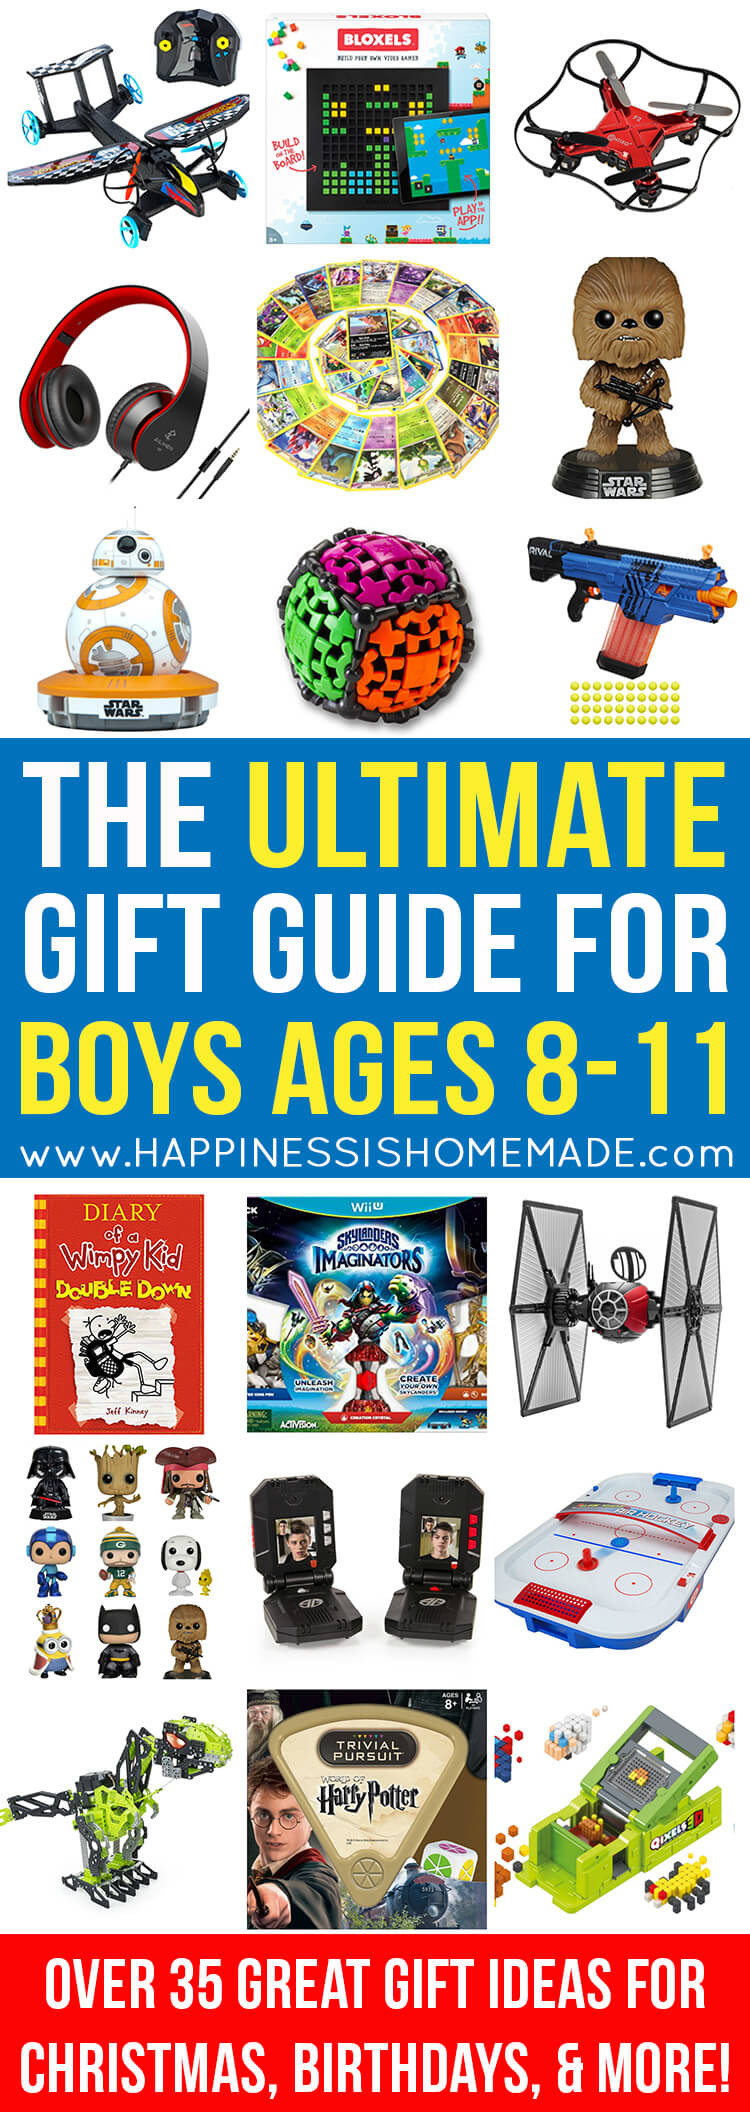 Gift Ideas For 8 Year Old Boys
 The Best Gift Ideas for Boys Ages 8 11 Happiness is Homemade